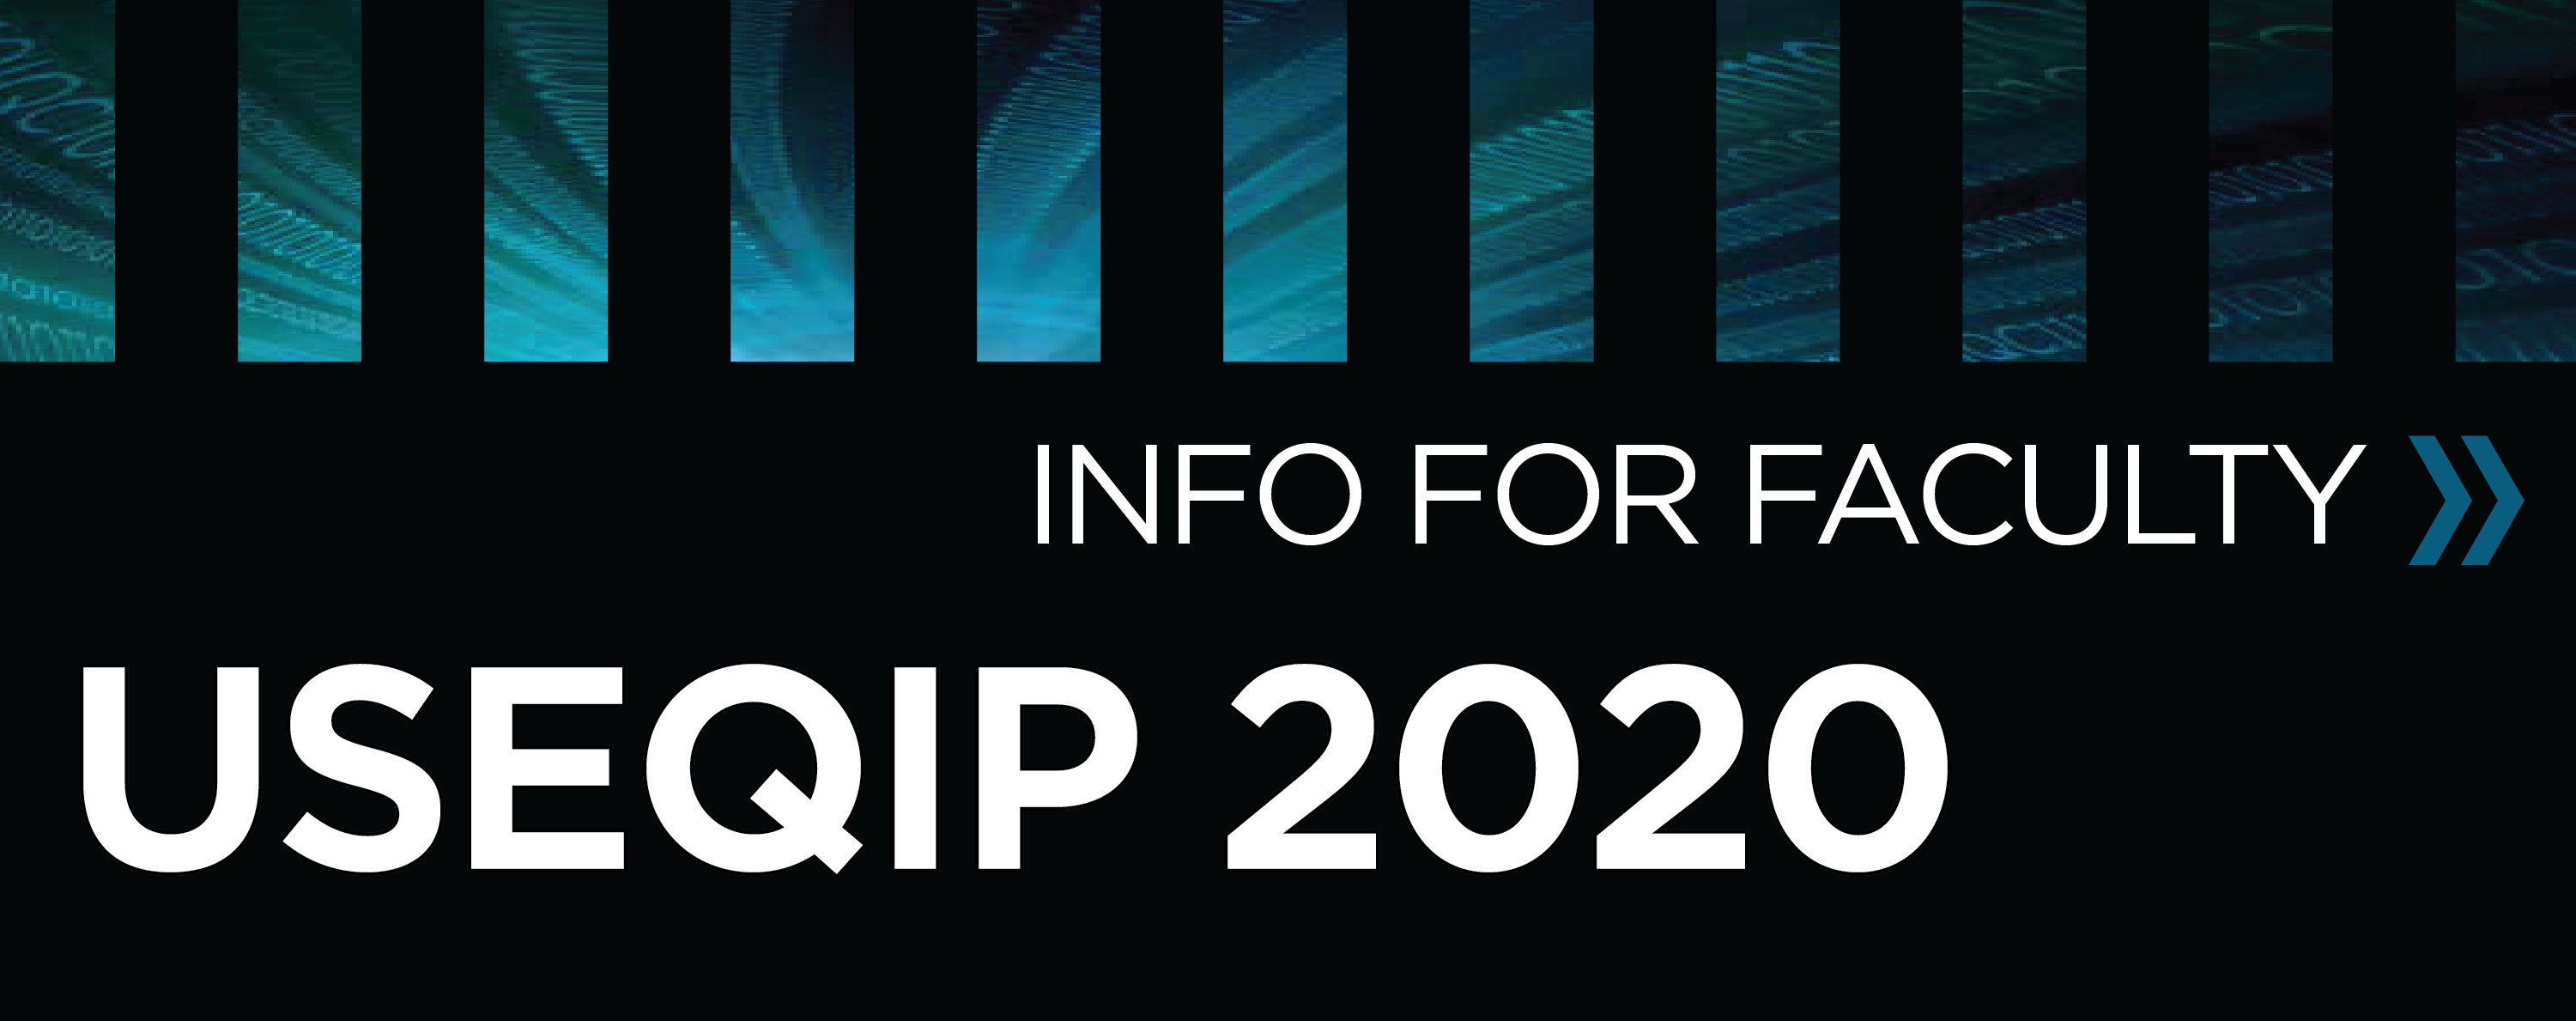 USEQIP 2020 Info for FAculty